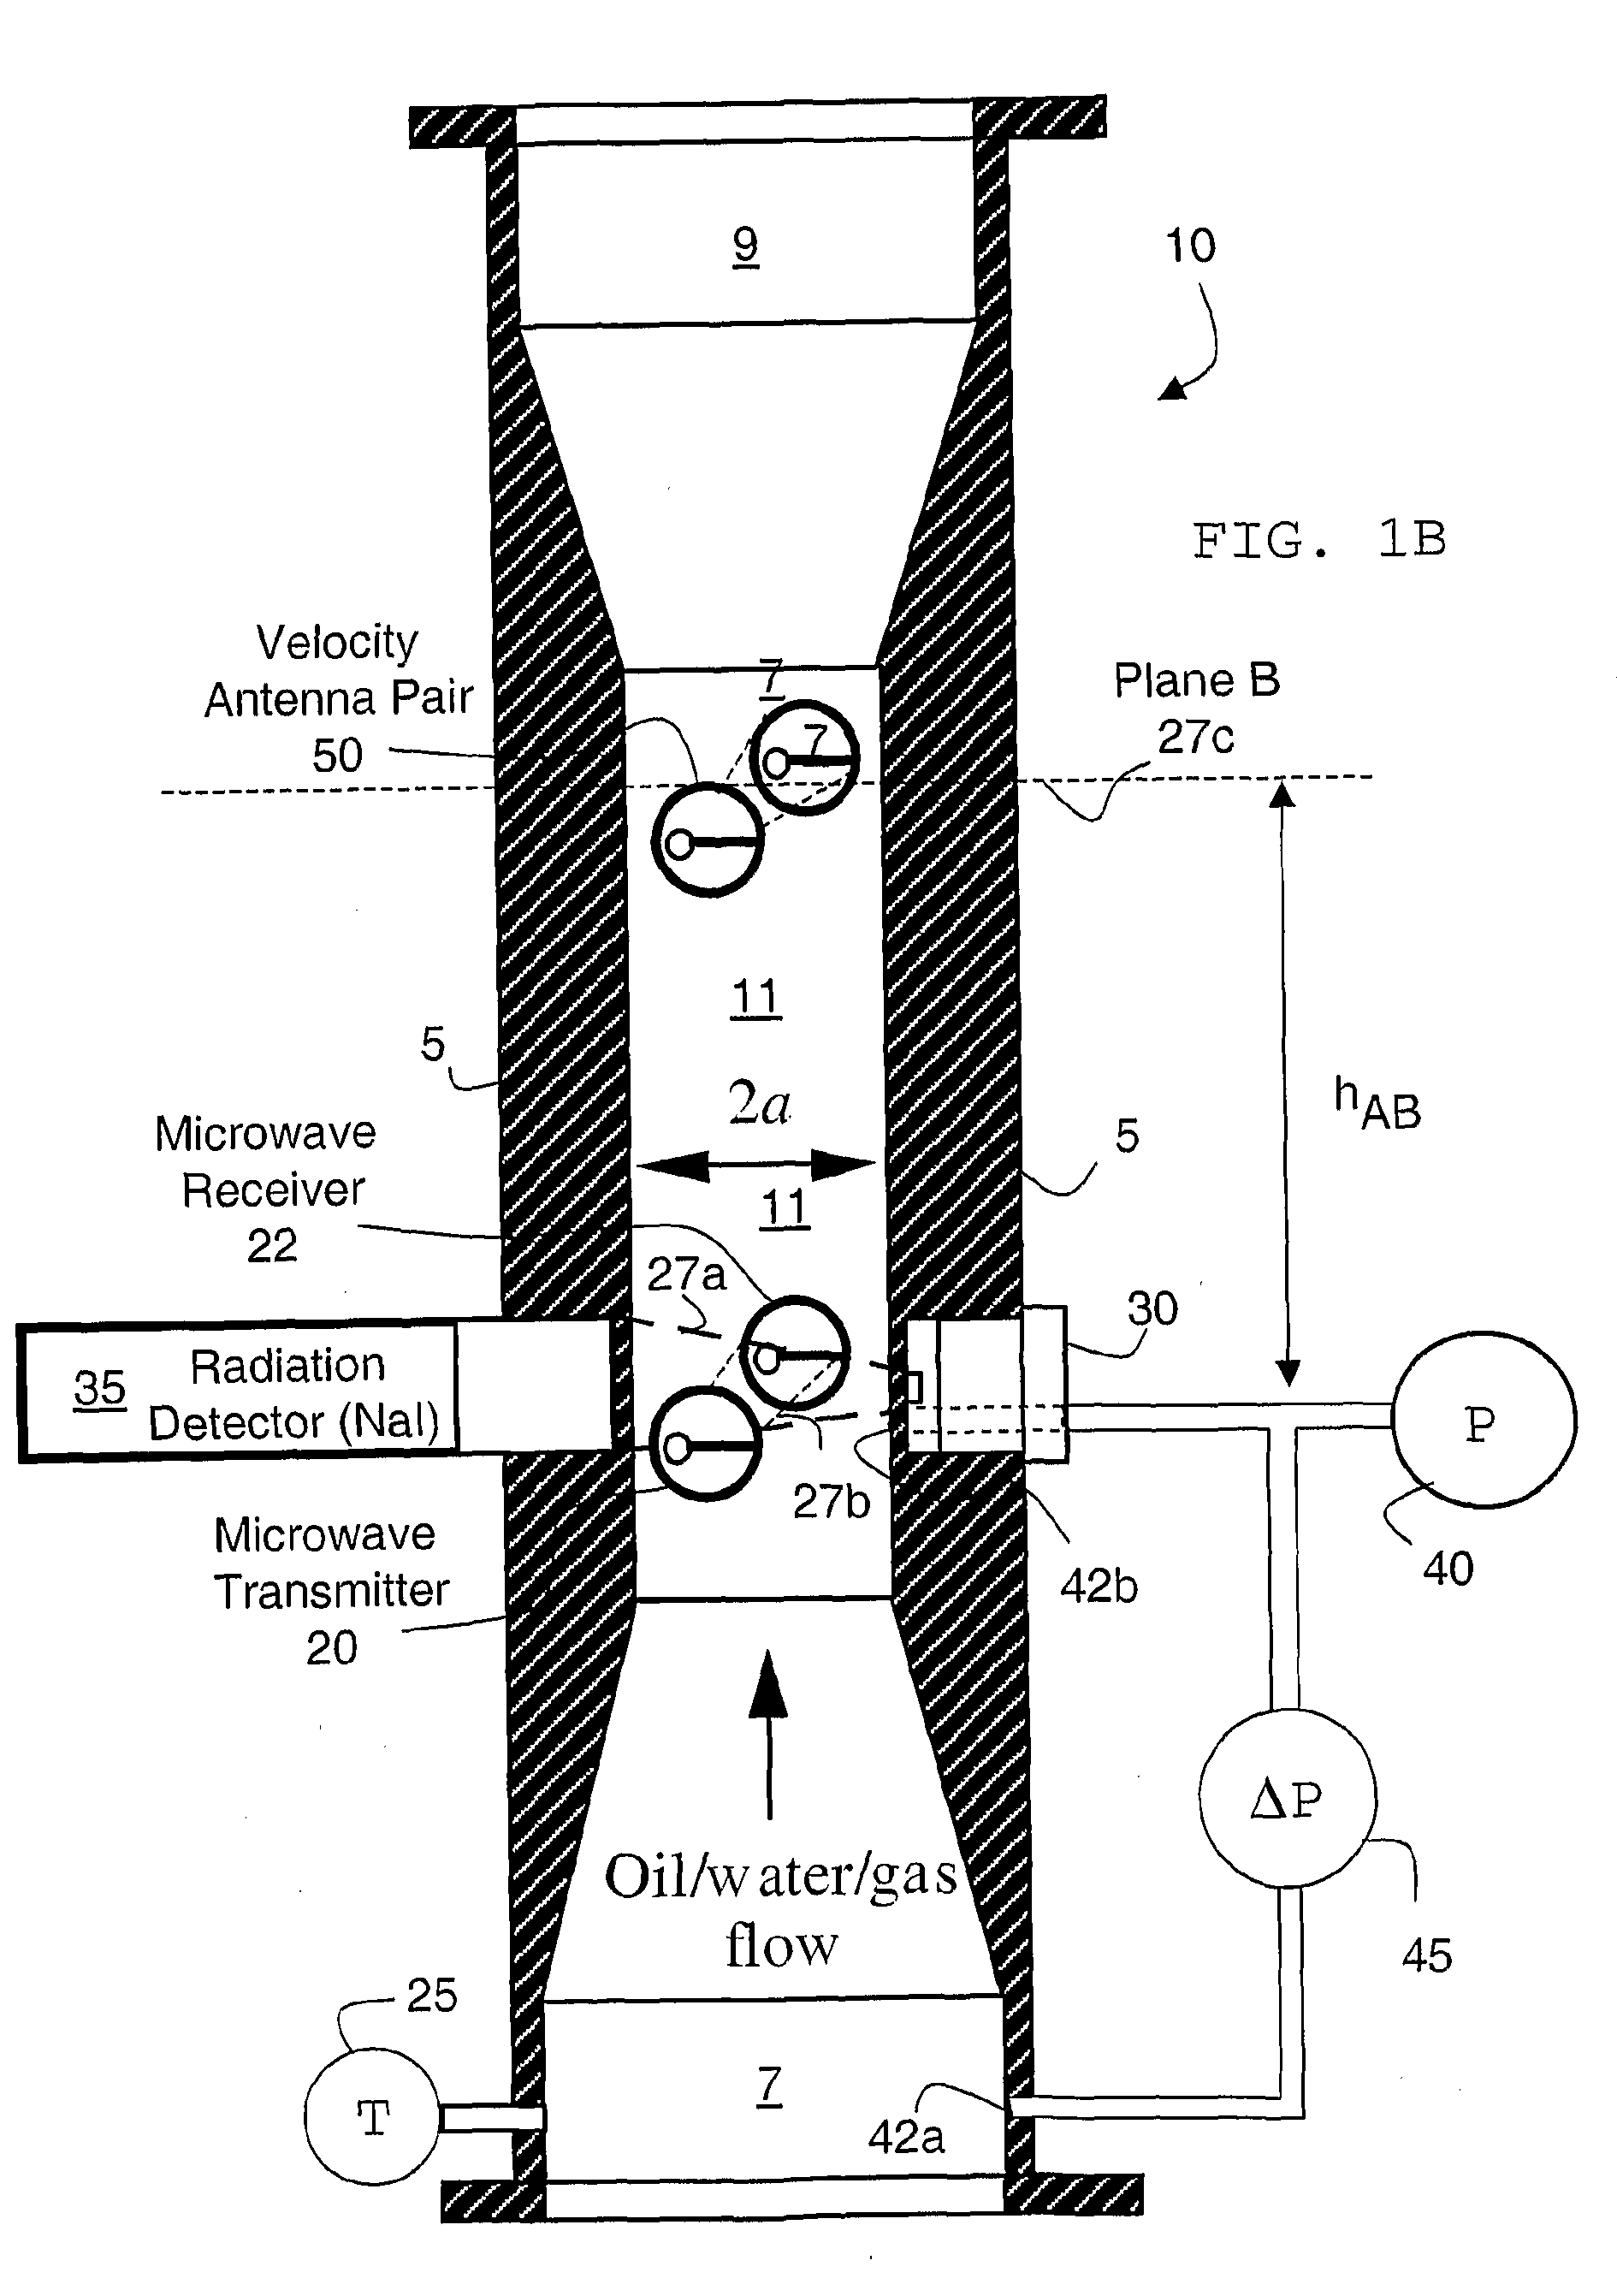 Systems and Methods For Measuring Multiphase Flow in a Hydrocarbon Transporting Pipeline